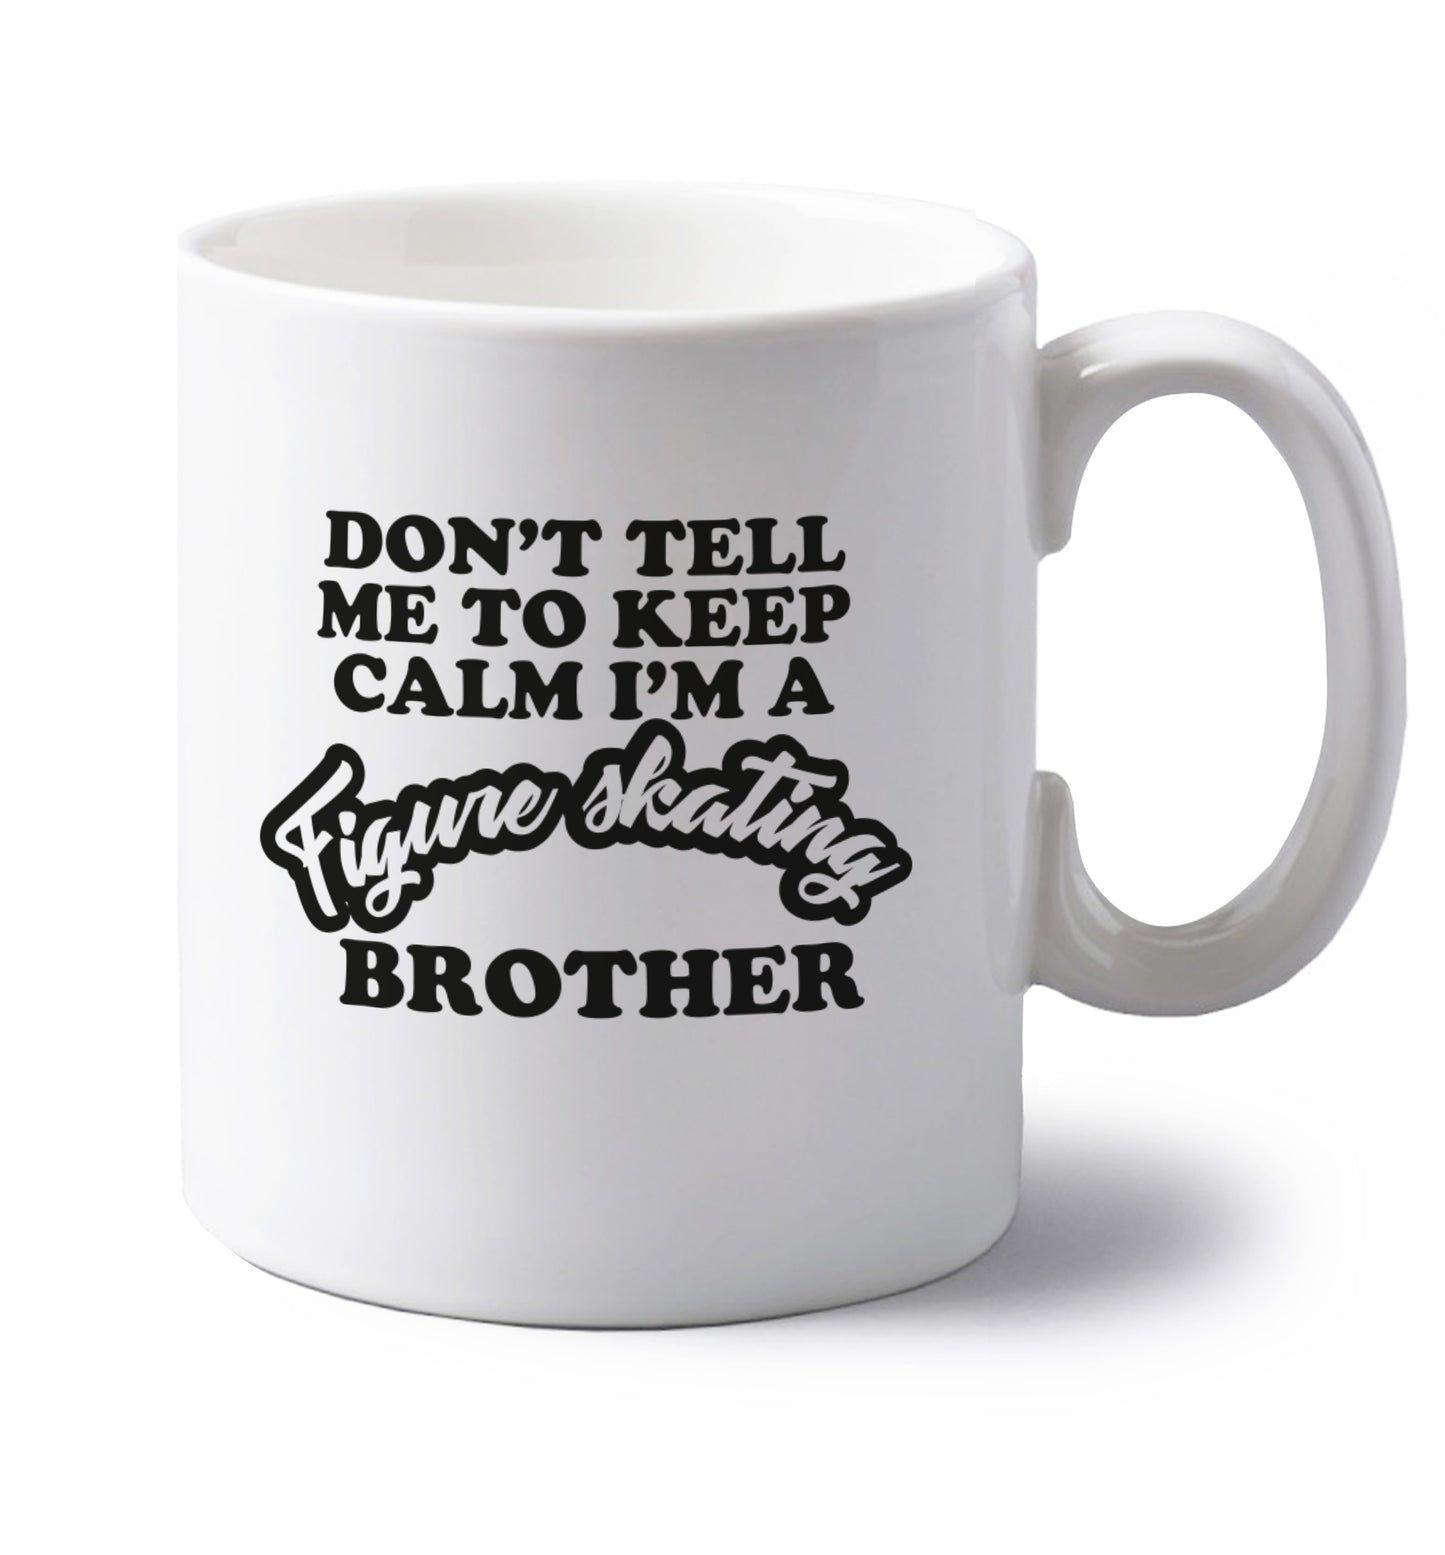 Don't tell me to keep calm I'm a figure skating brother left handed white ceramic mug 